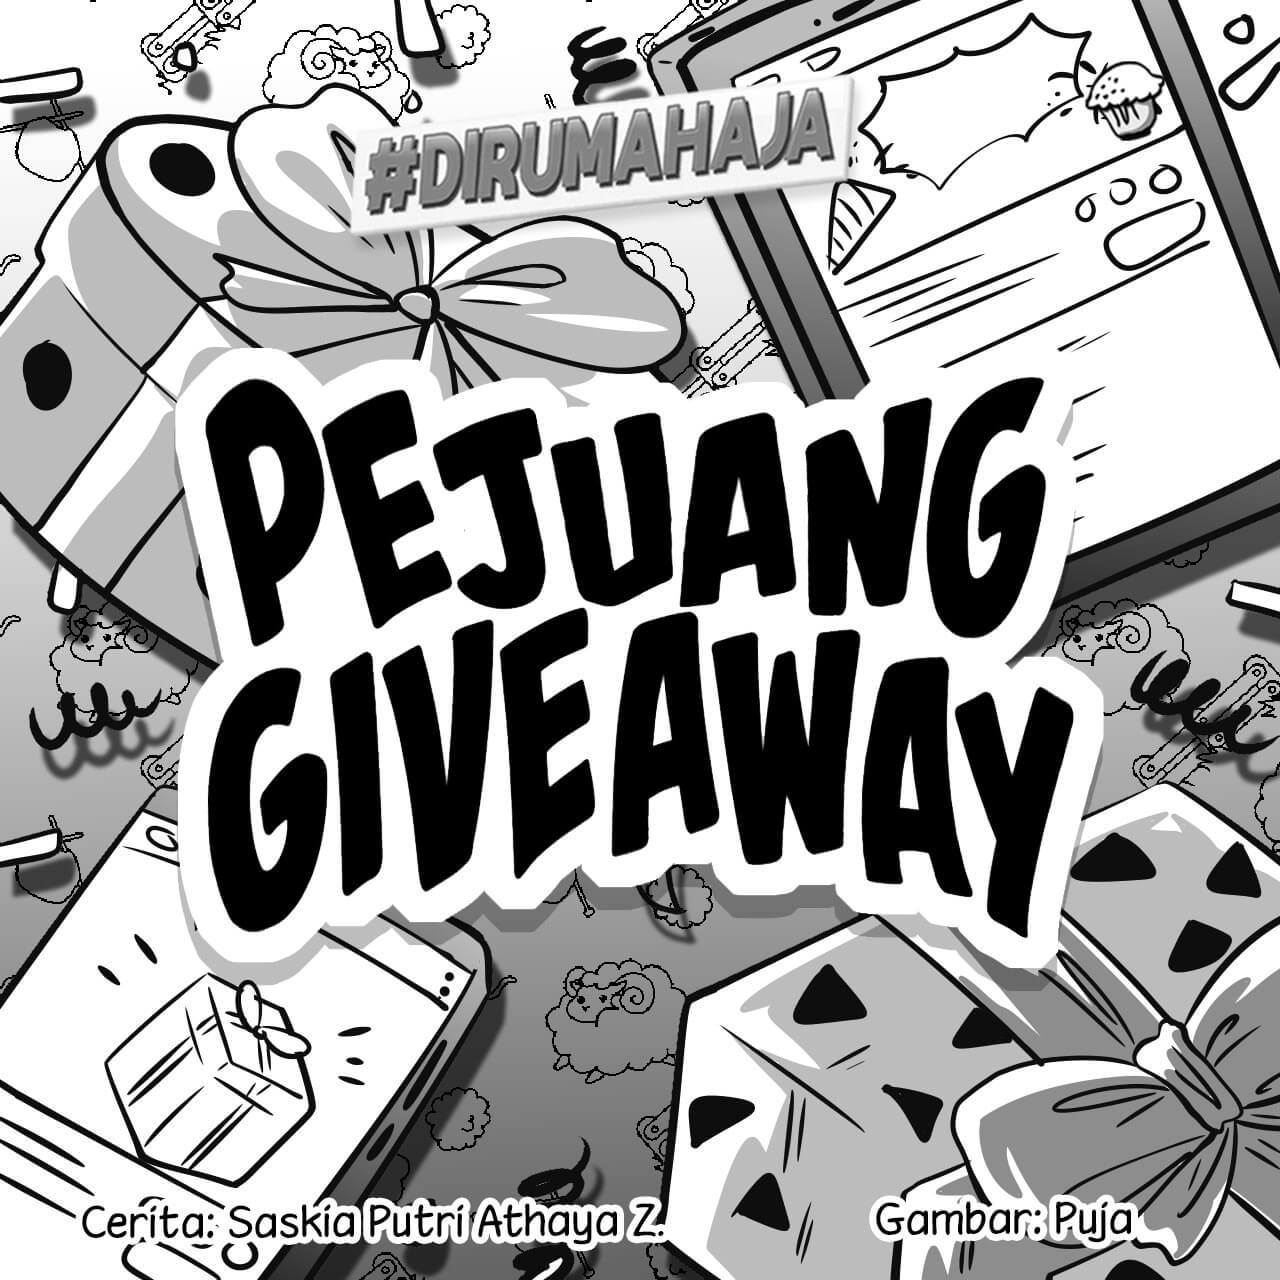 Pejuang Giveaway Cover bw